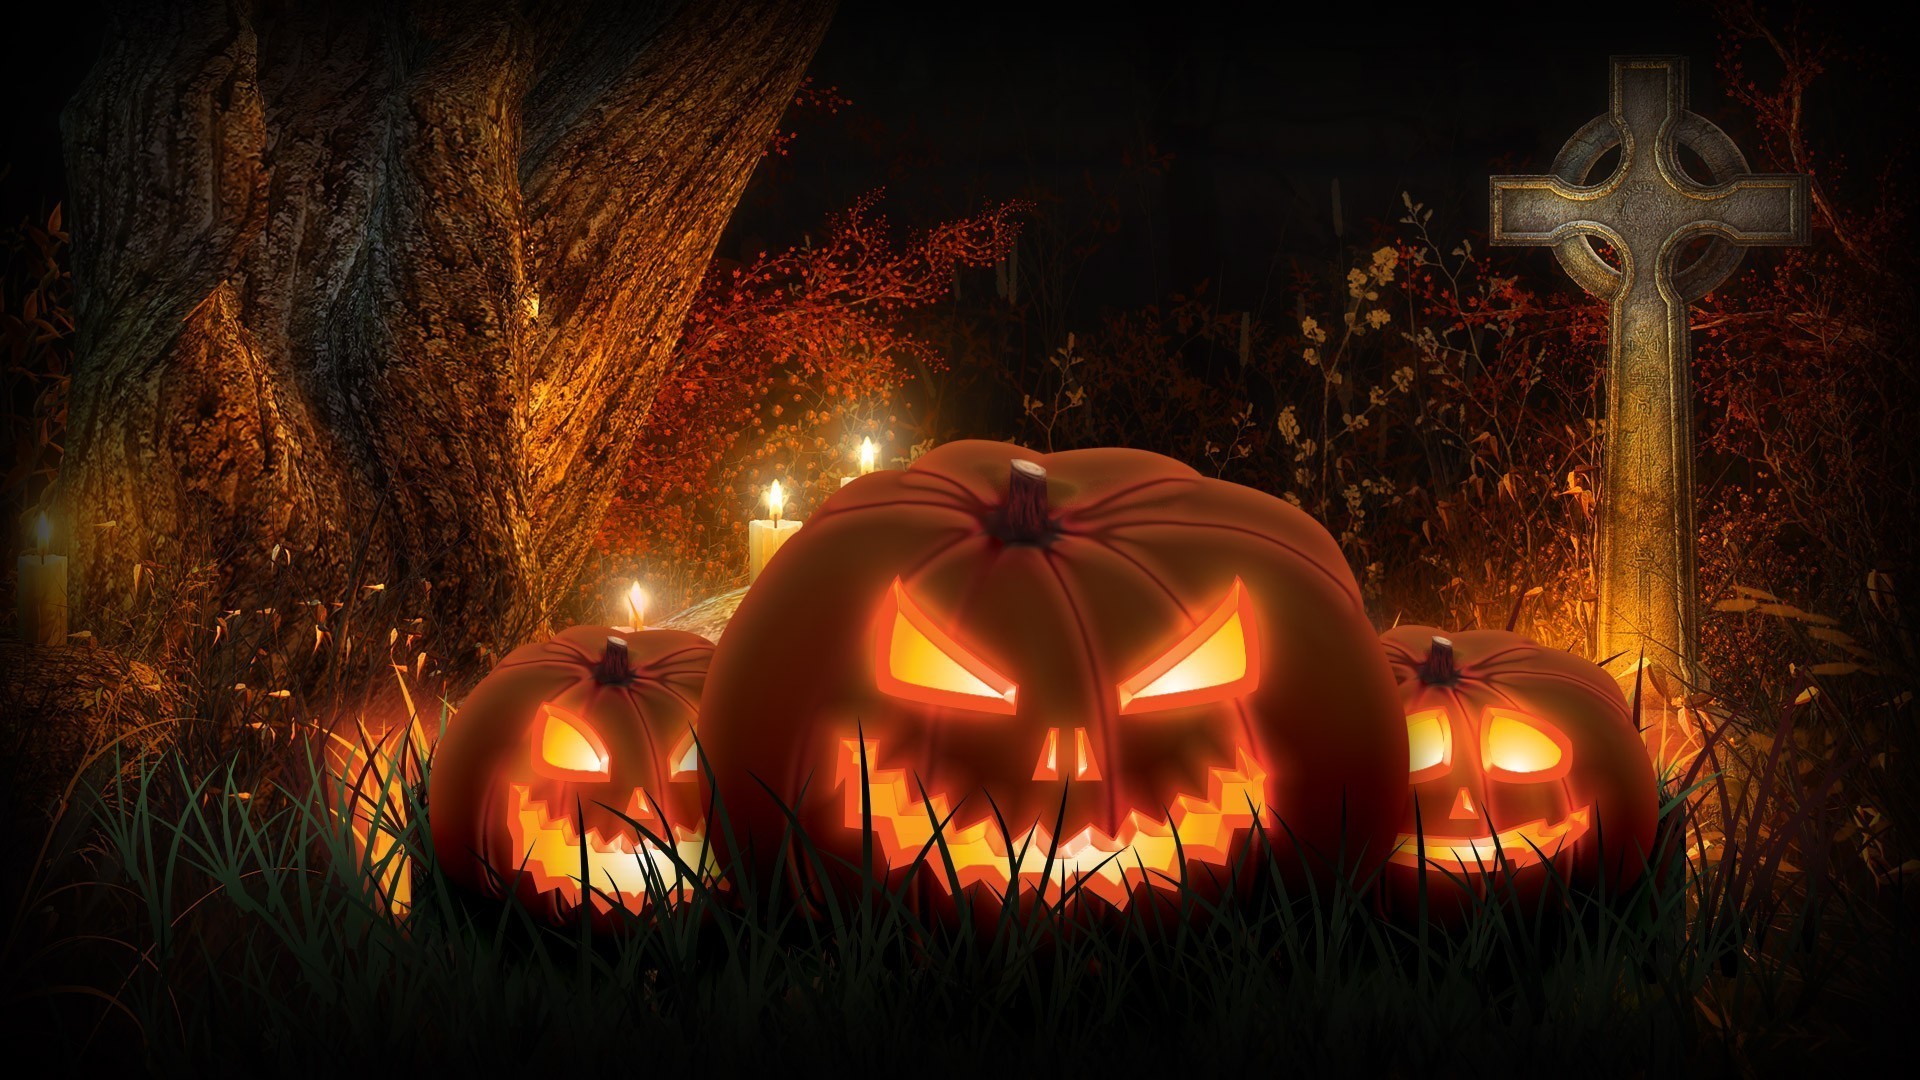 850 Halloween HD Wallpapers and Backgrounds